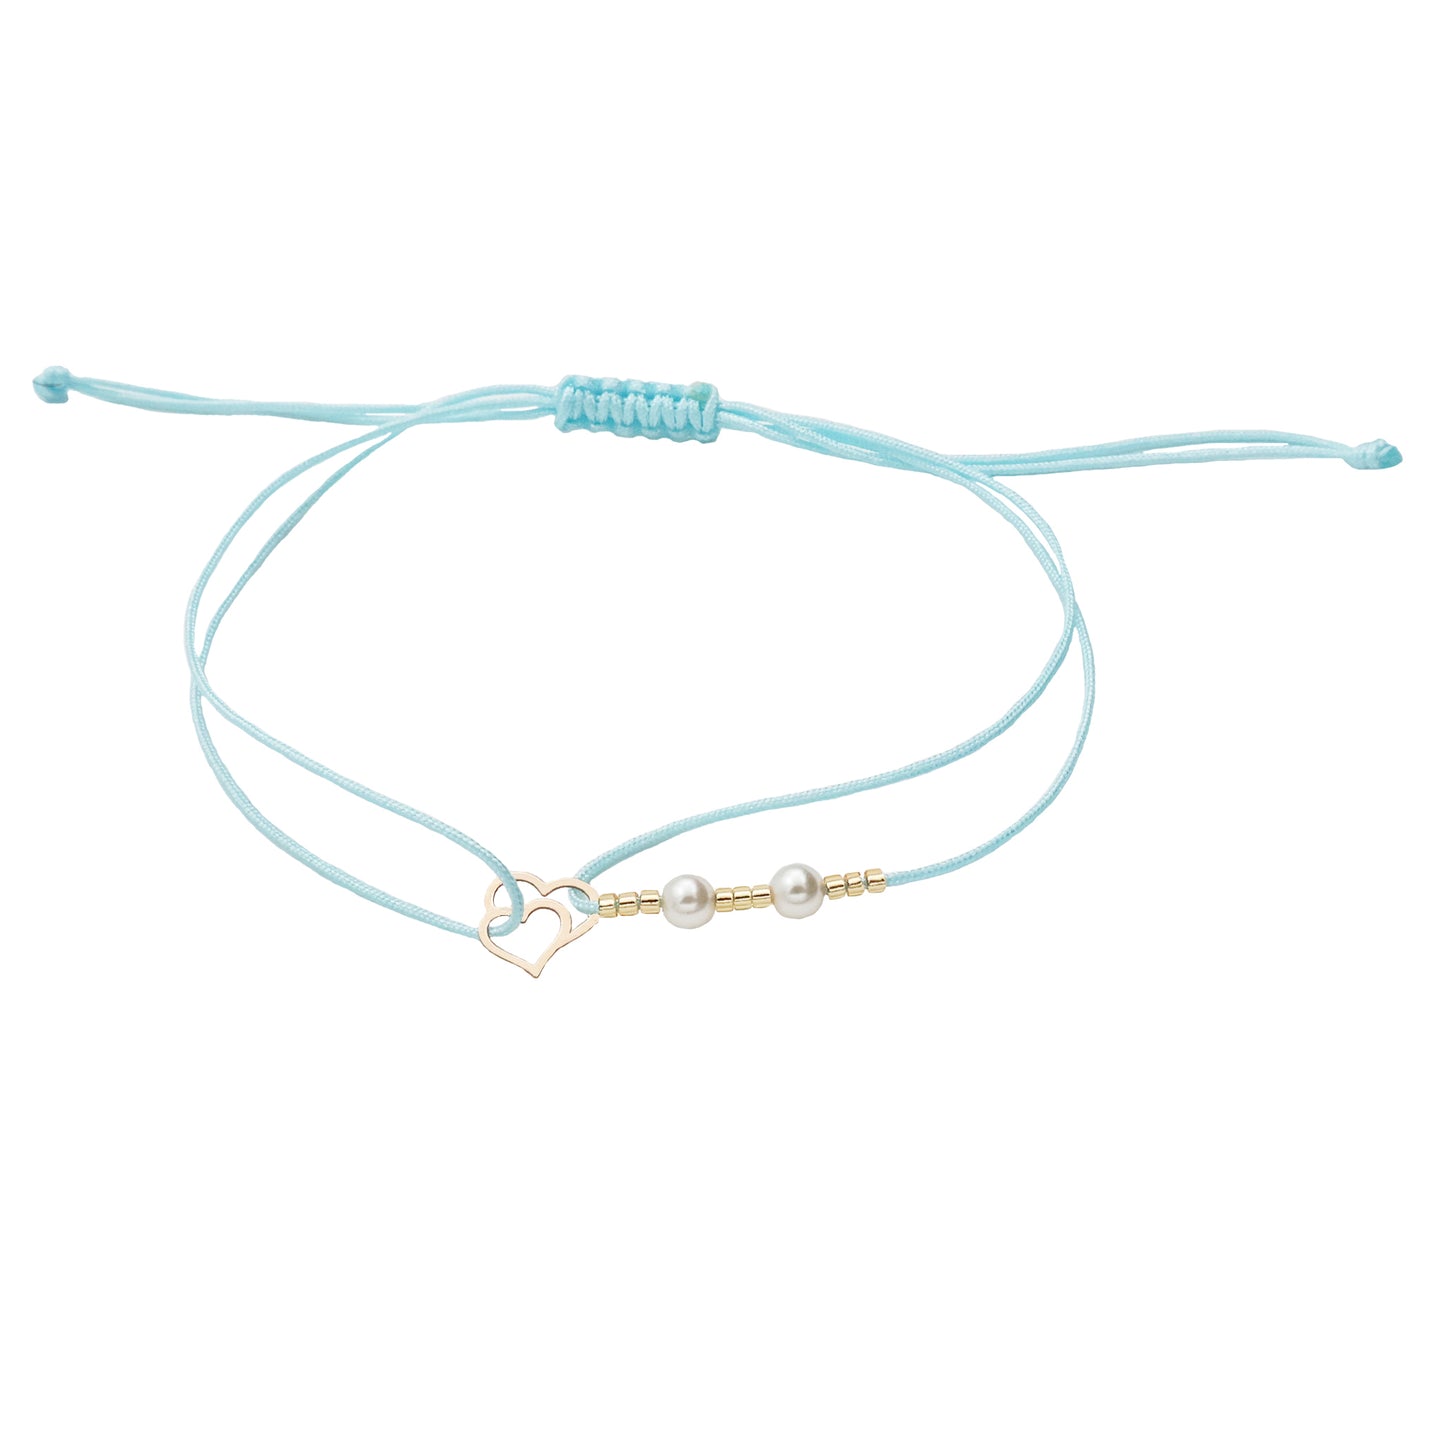 Bracelet with heart 14K solid gold pendant, Miyuki beads and 2 artificial pearls